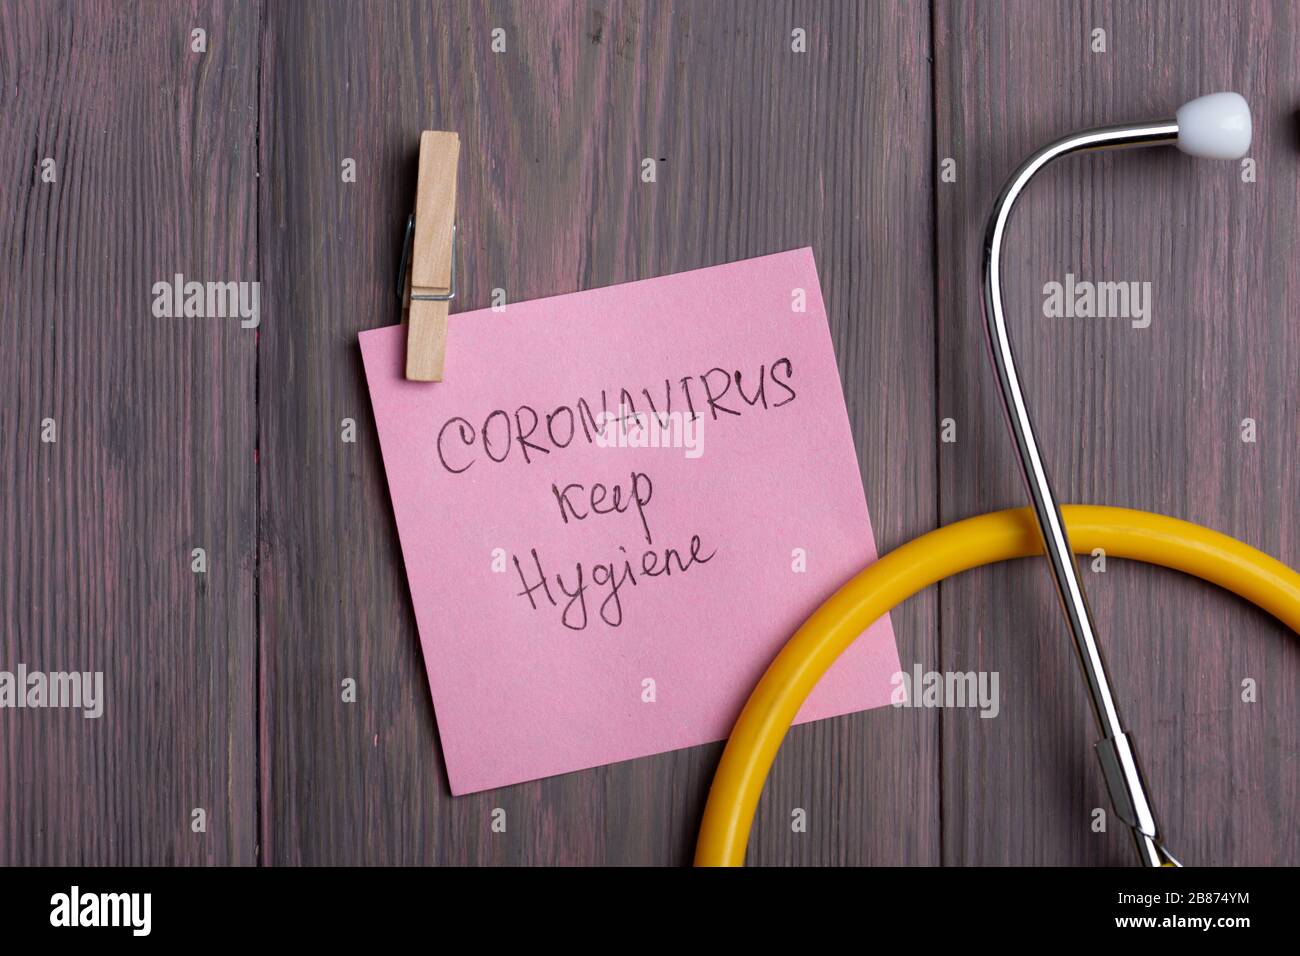 Text Coronavirus keep hygiene on sticky note that hangs with a clothespin and stethoscope on wooden background - healthcare and medical concept Stock Photo